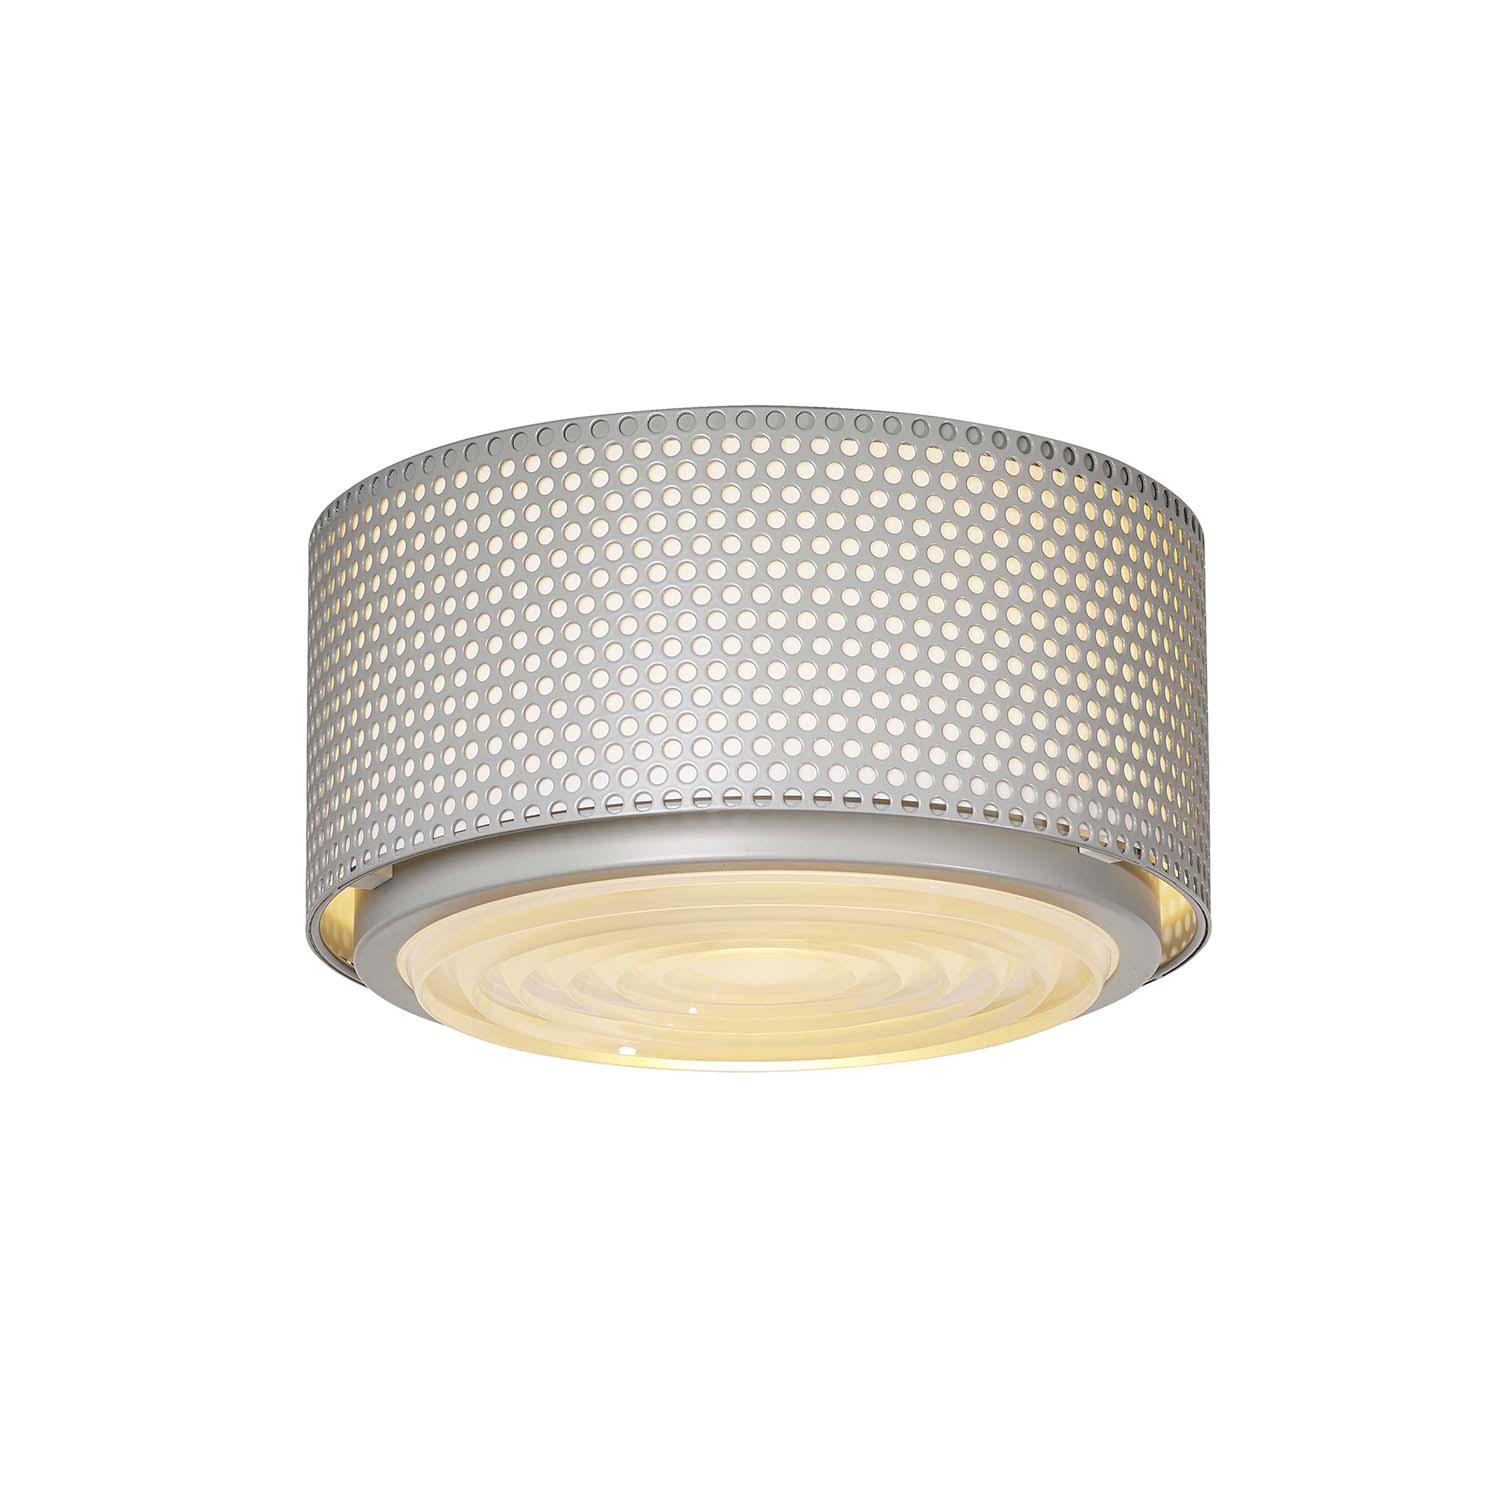 G13 - Vintage 1950s retro ceiling light with perforated steel design